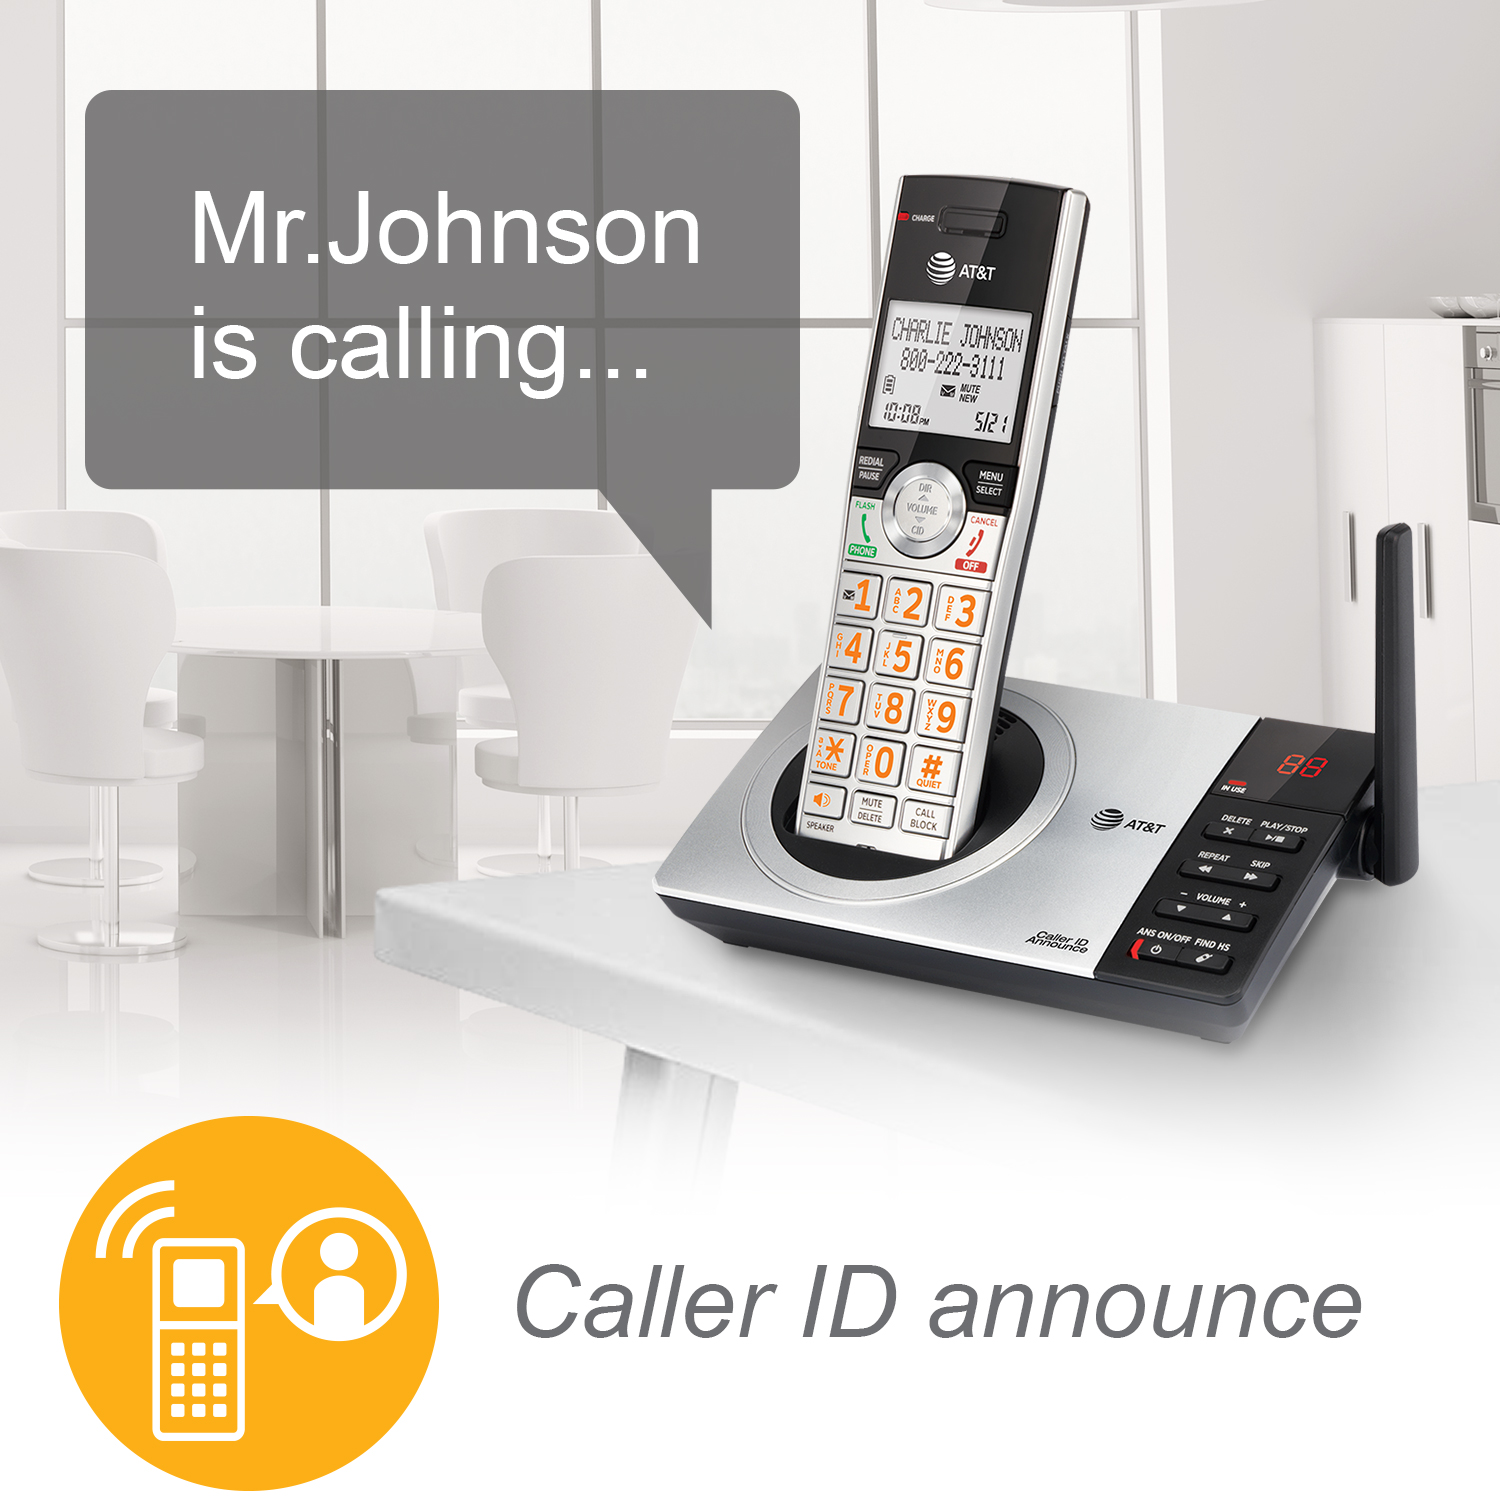 6 handset phone system with smart call blocker - view 10